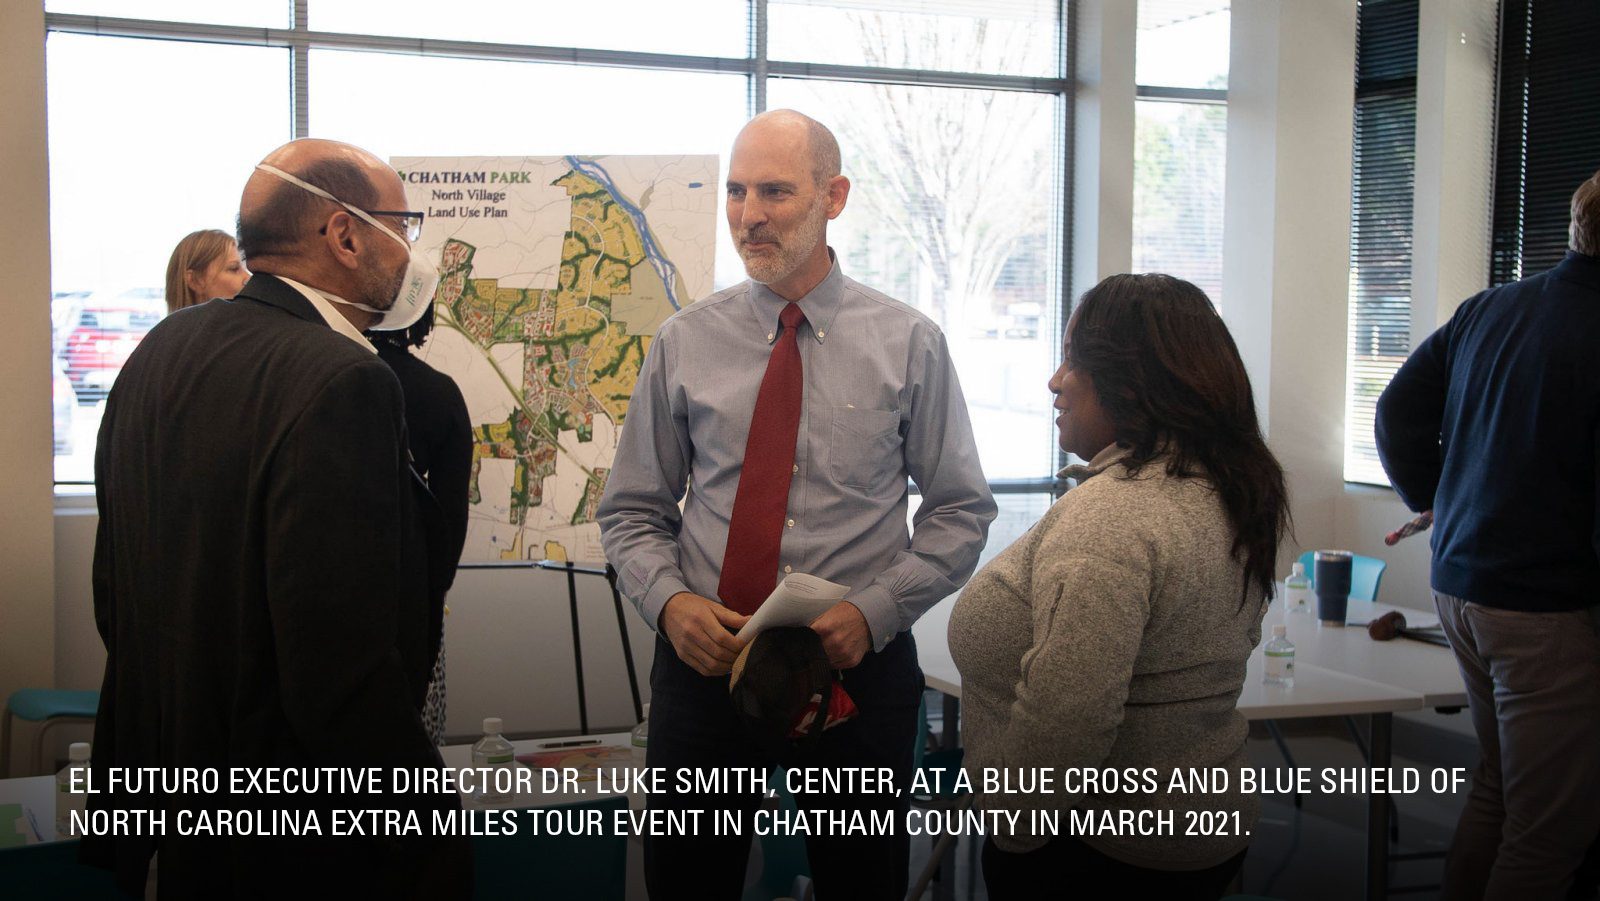 El Futuro Executive Director Dr. Luke Smith, center, at a Blue Cross and Blue Shield of North Carolina Extra Miles Tour event in Chatham County in March 2021.